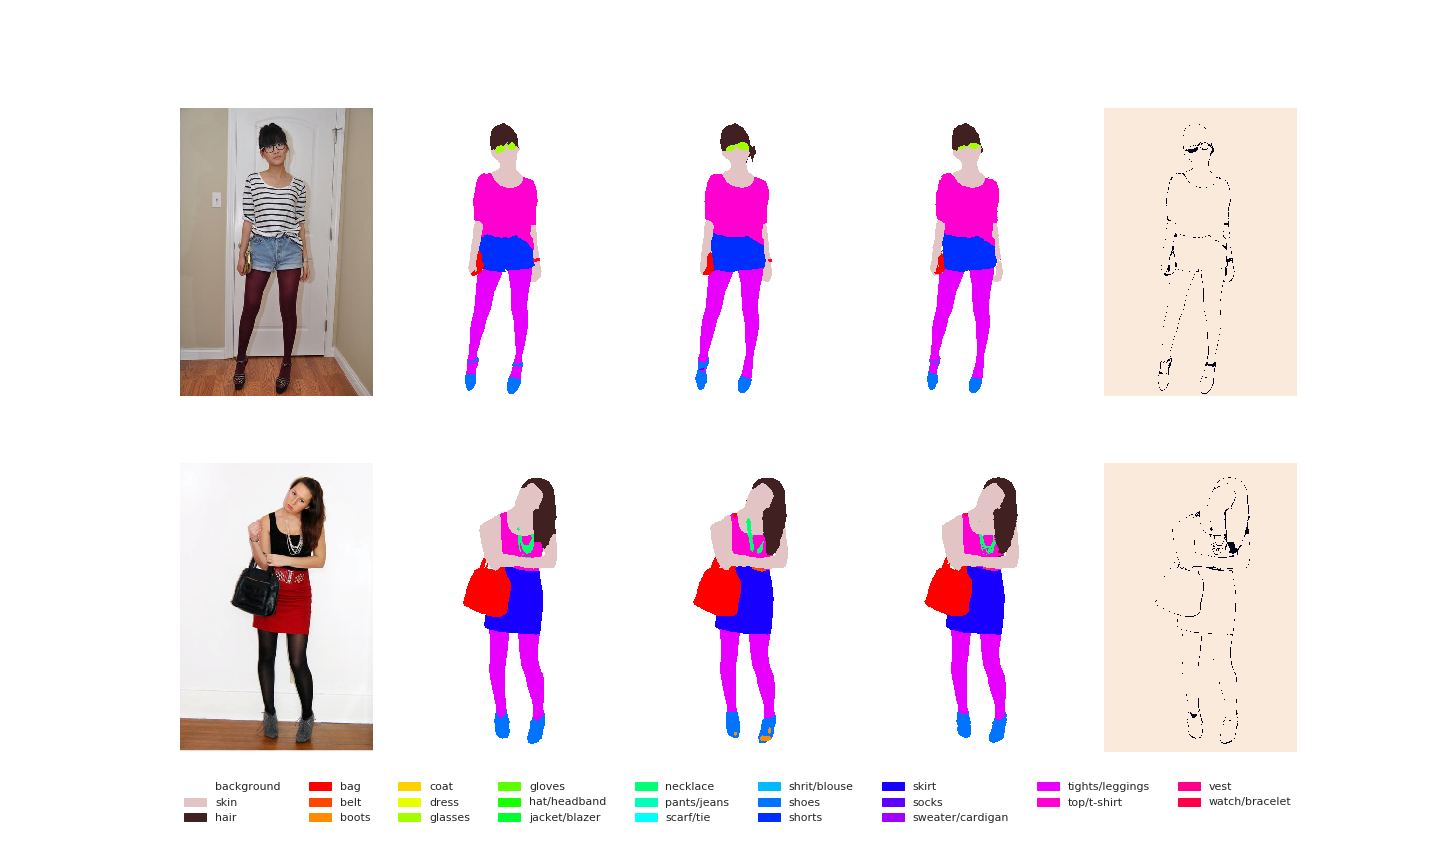 From left to right: the input image, the ground truth segmentation, the predicted segmentation (ResNeXtFPN), the prediction with CRF, and the incorrectly classi- fied pixels (shown in black) for two top scoring test data image predictions from refined Fashionista.